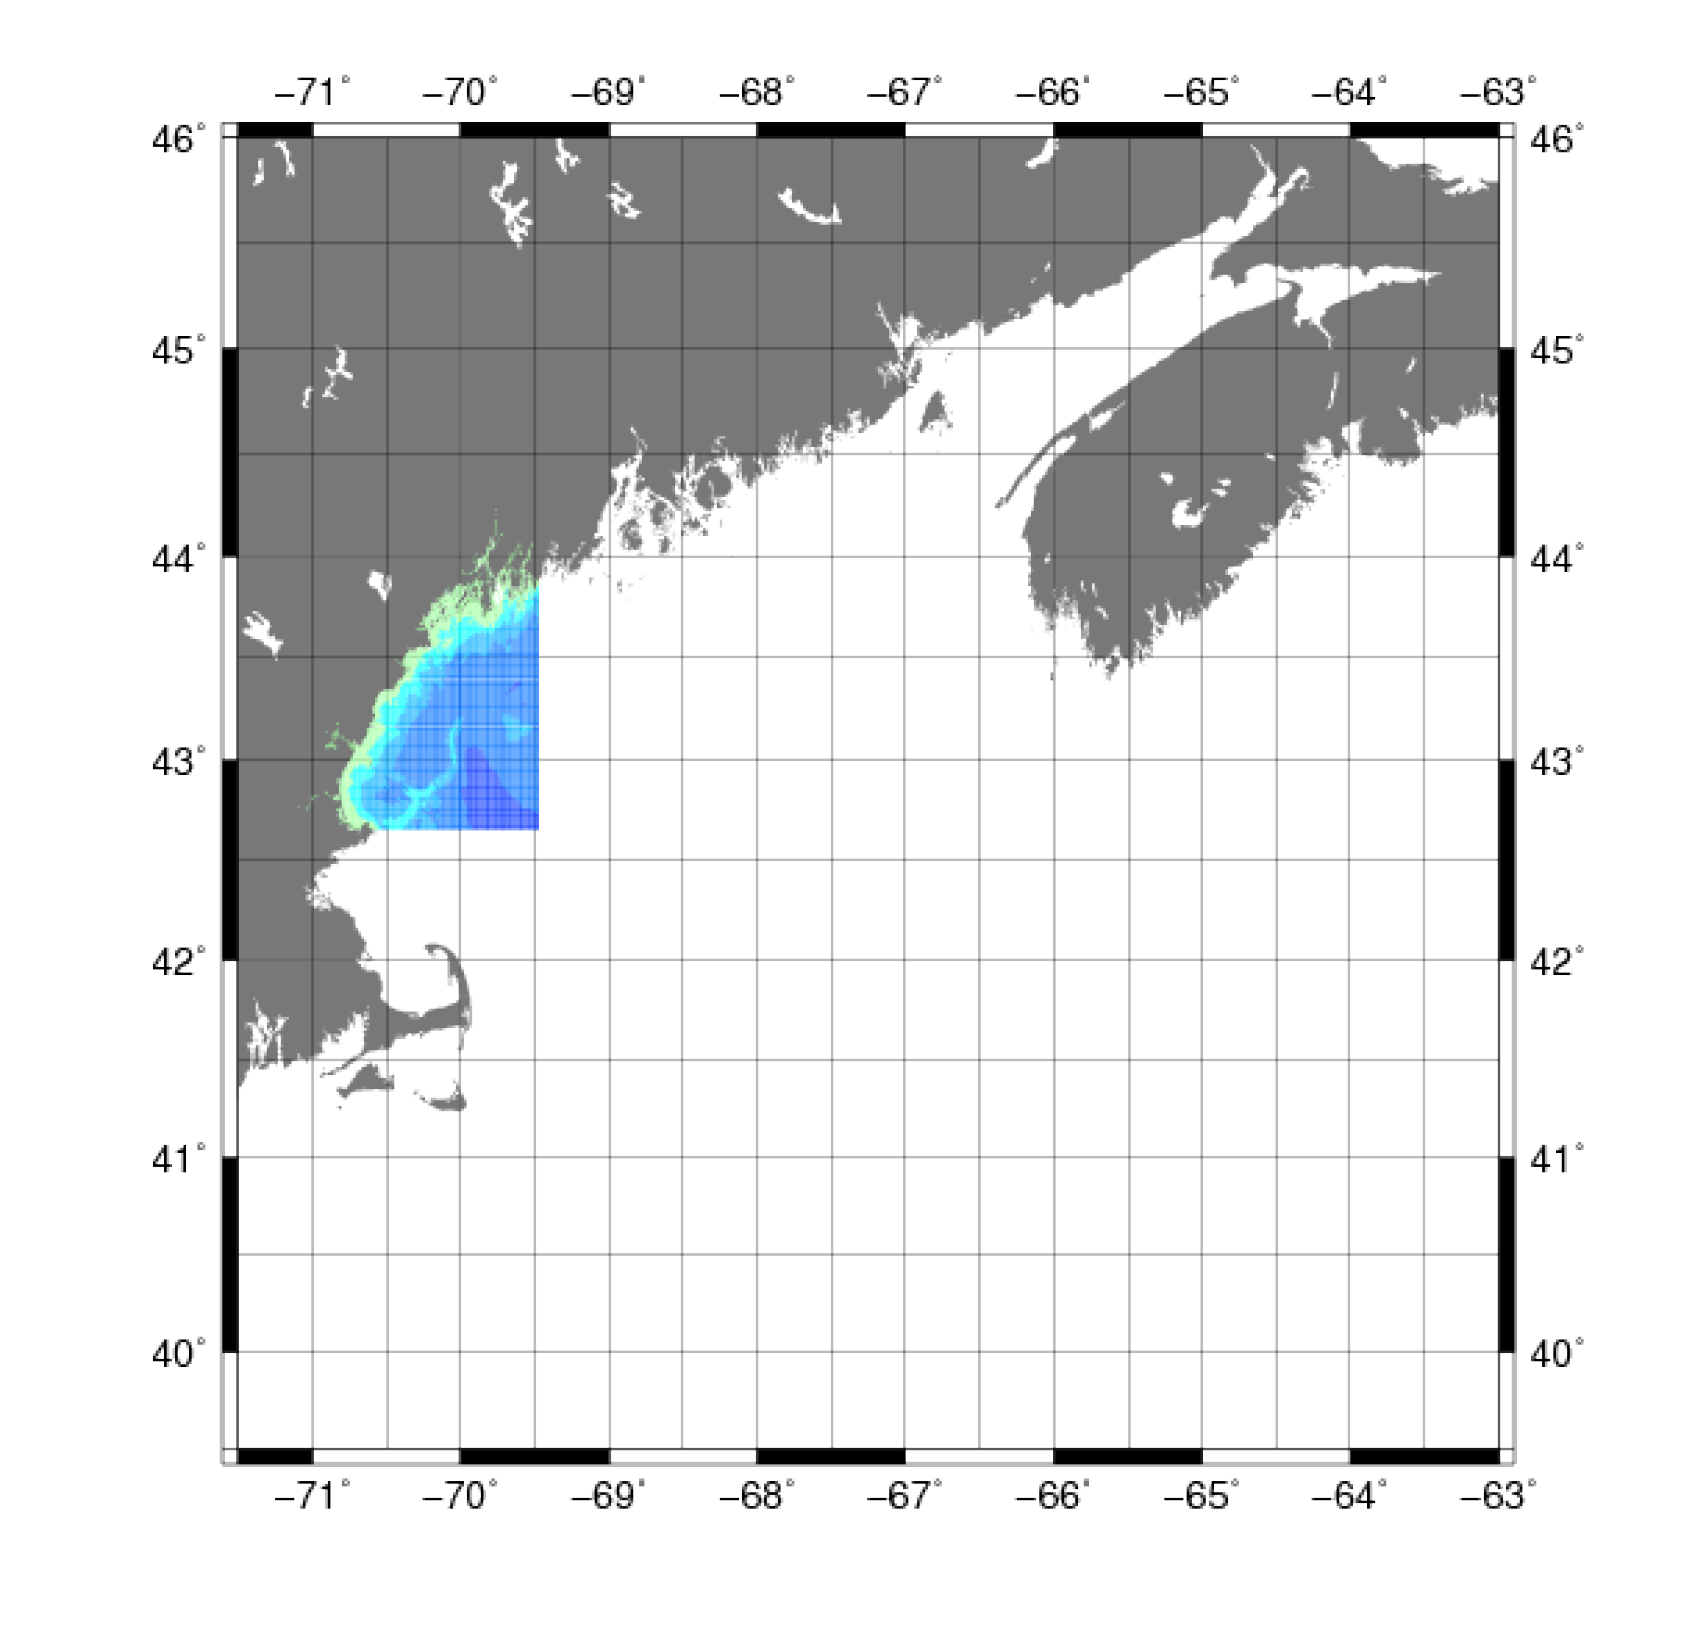 thumbnail image and link to larger image of a map showing data used in the construction of the digital bathymetry grid